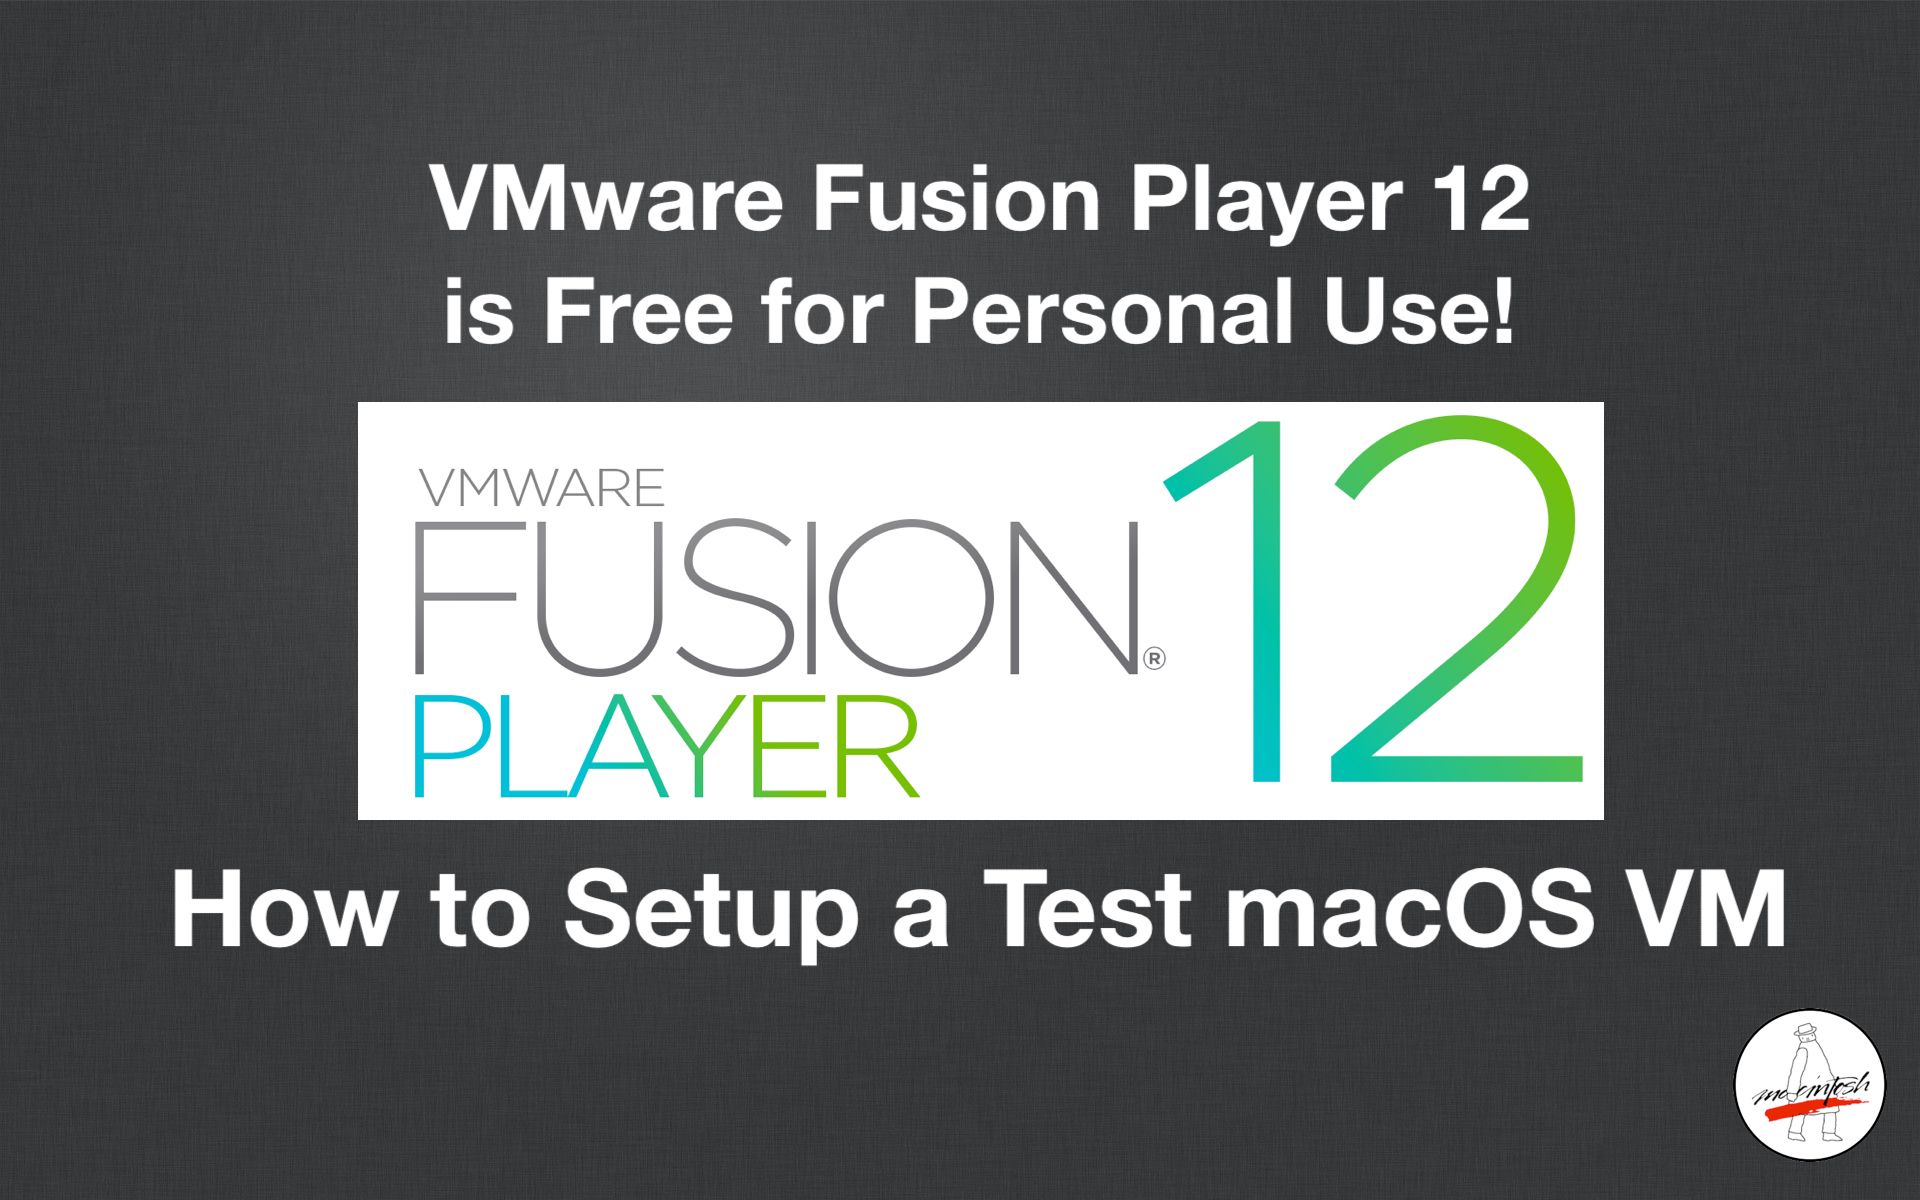 vmware mac os x image for amd